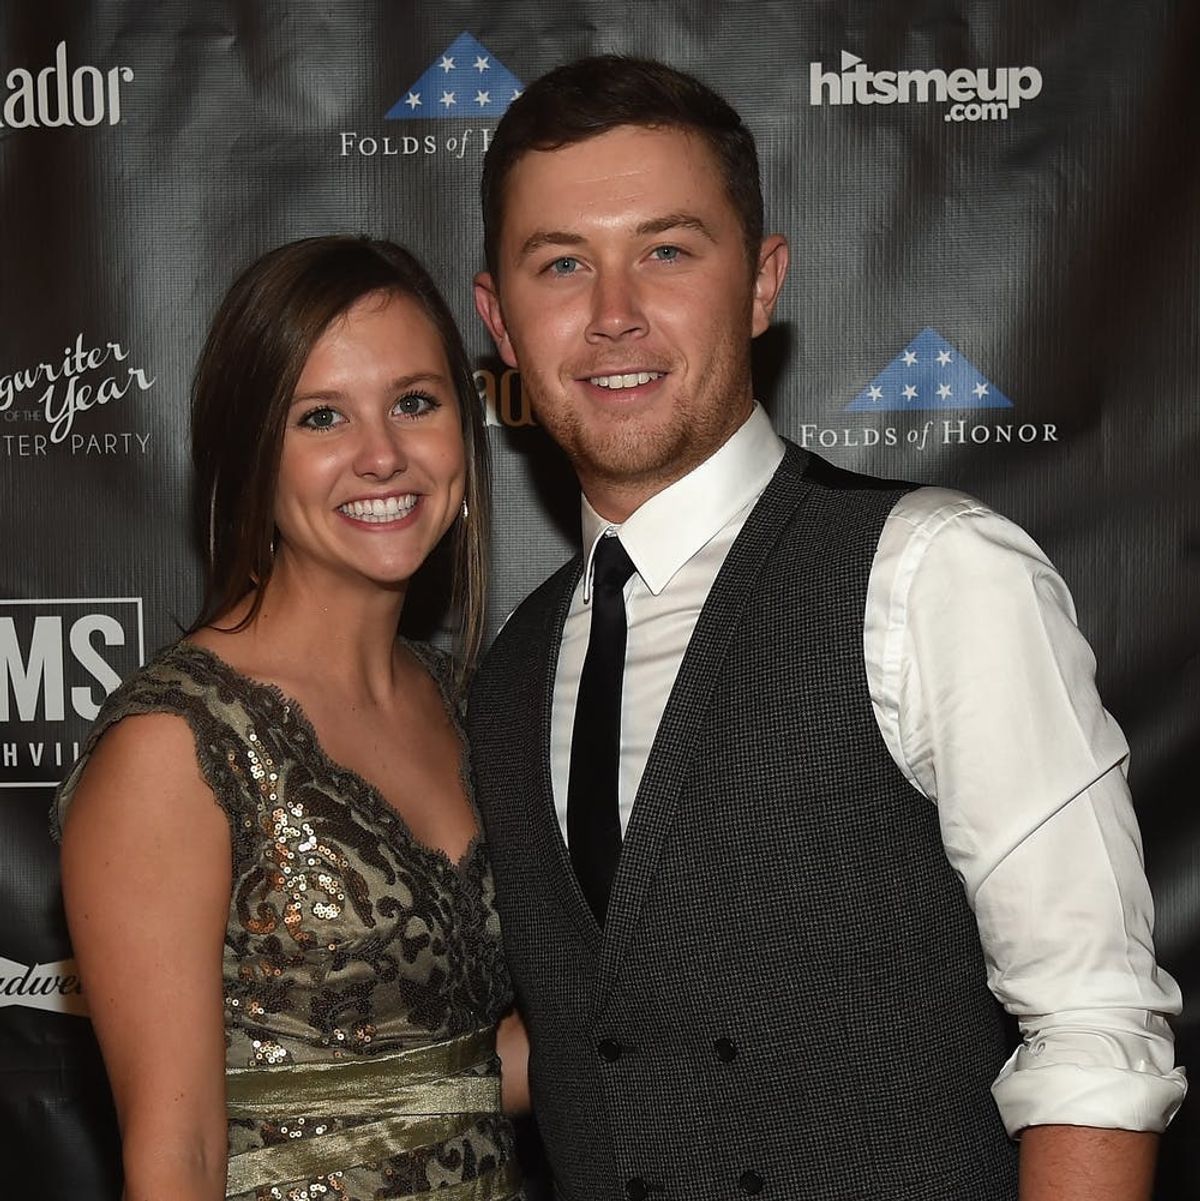 Former “American Idol” Contestant Scotty McCreery Is Engaged!